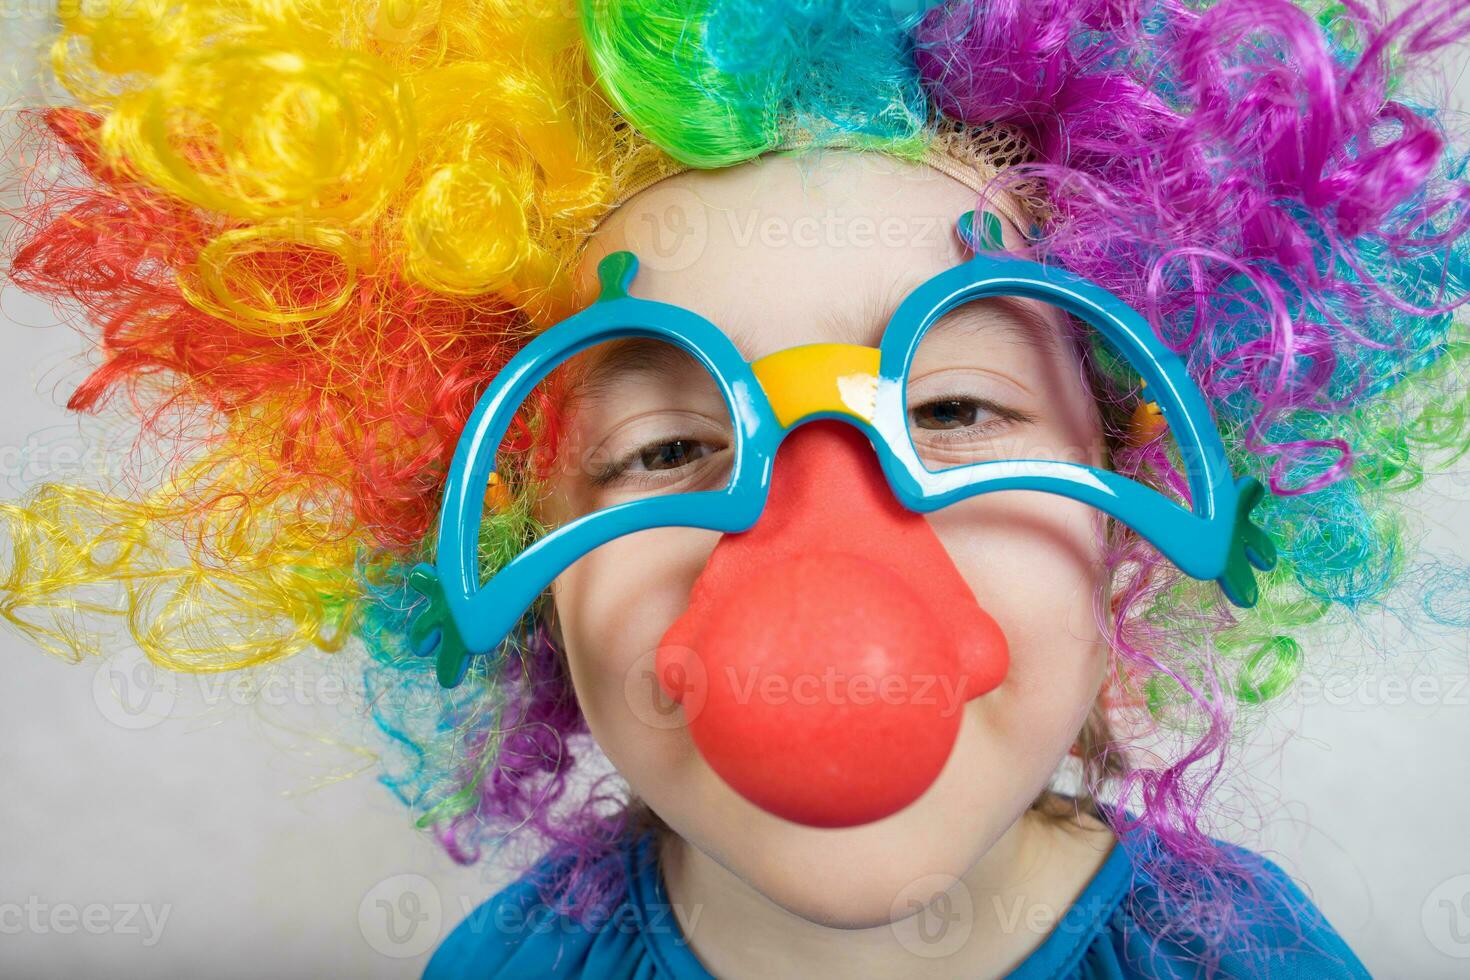 https://static.vecteezy.com/system/resources/previews/026/173/236/non_2x/boy-of-five-years-dressed-in-the-costume-of-a-clown-and-funny-eyeglasses-with-red-nose-photo.jpg